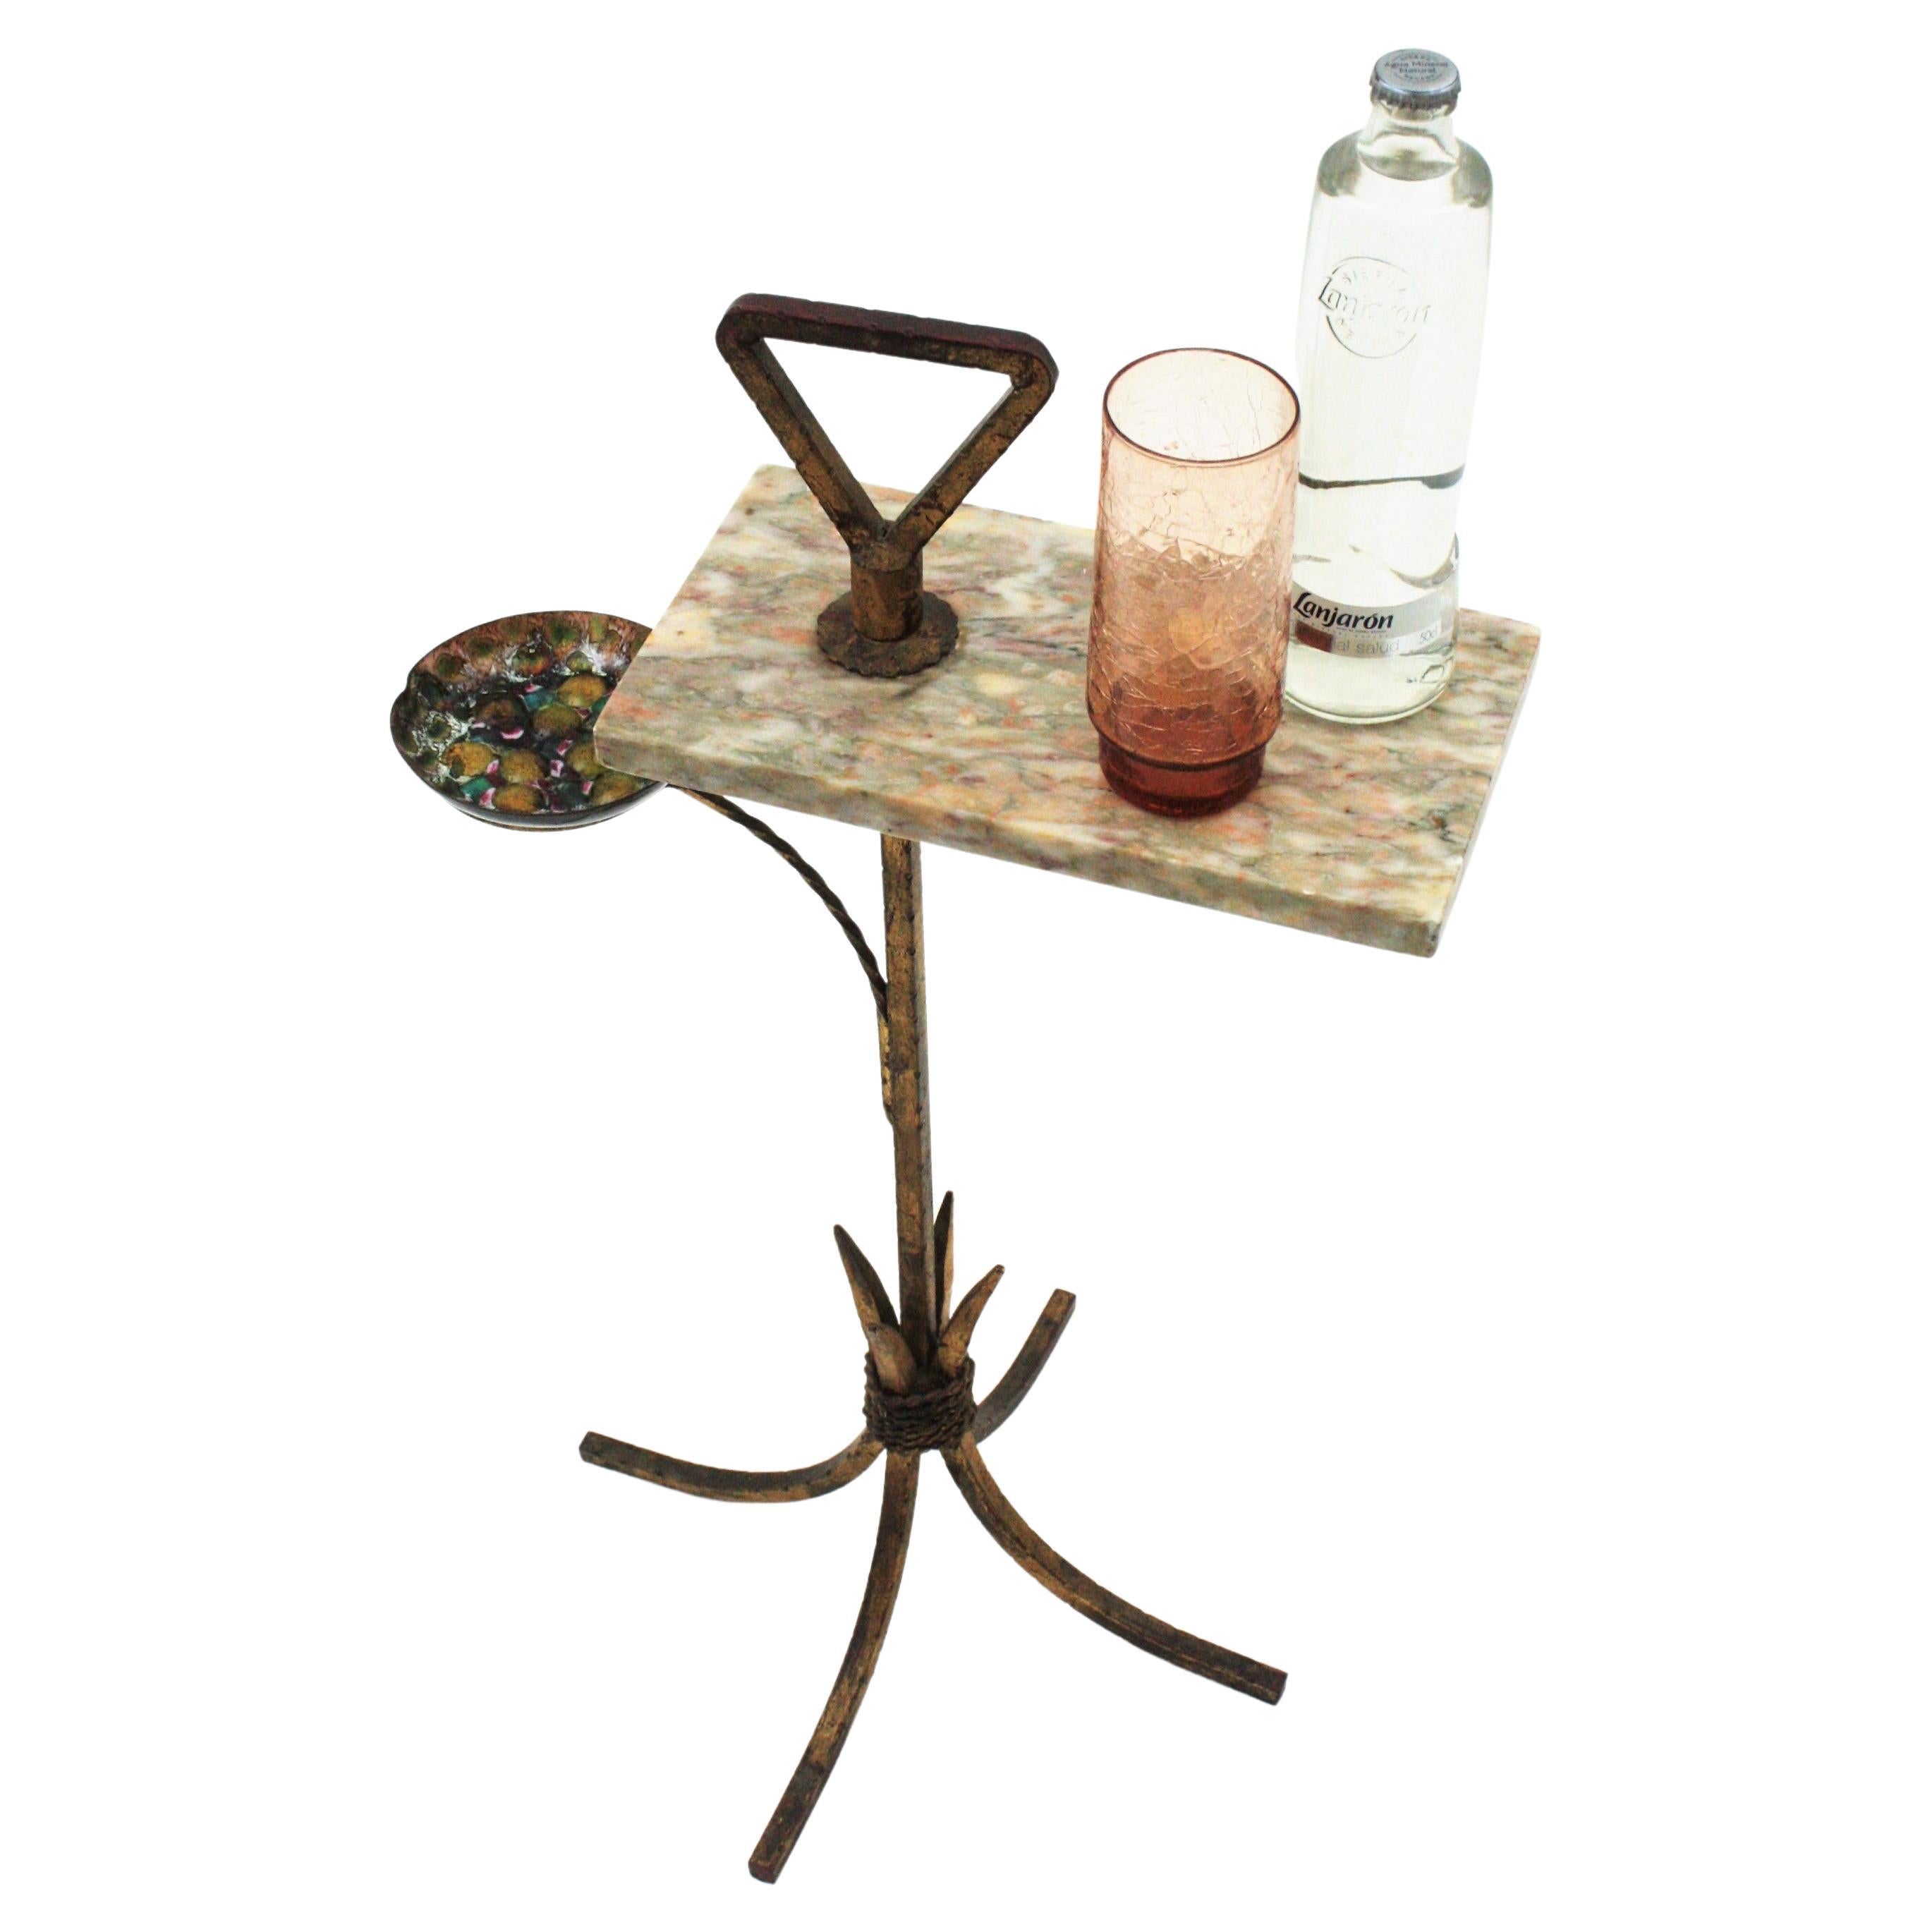 One of a kind gilt iron and marble end table with colorful enamel ashtray. Spain, 1940s-1950s.
This stylish hand forged iron table features a grey and white marble tabletop standing on a git iron structure with a four footed base. The marble top